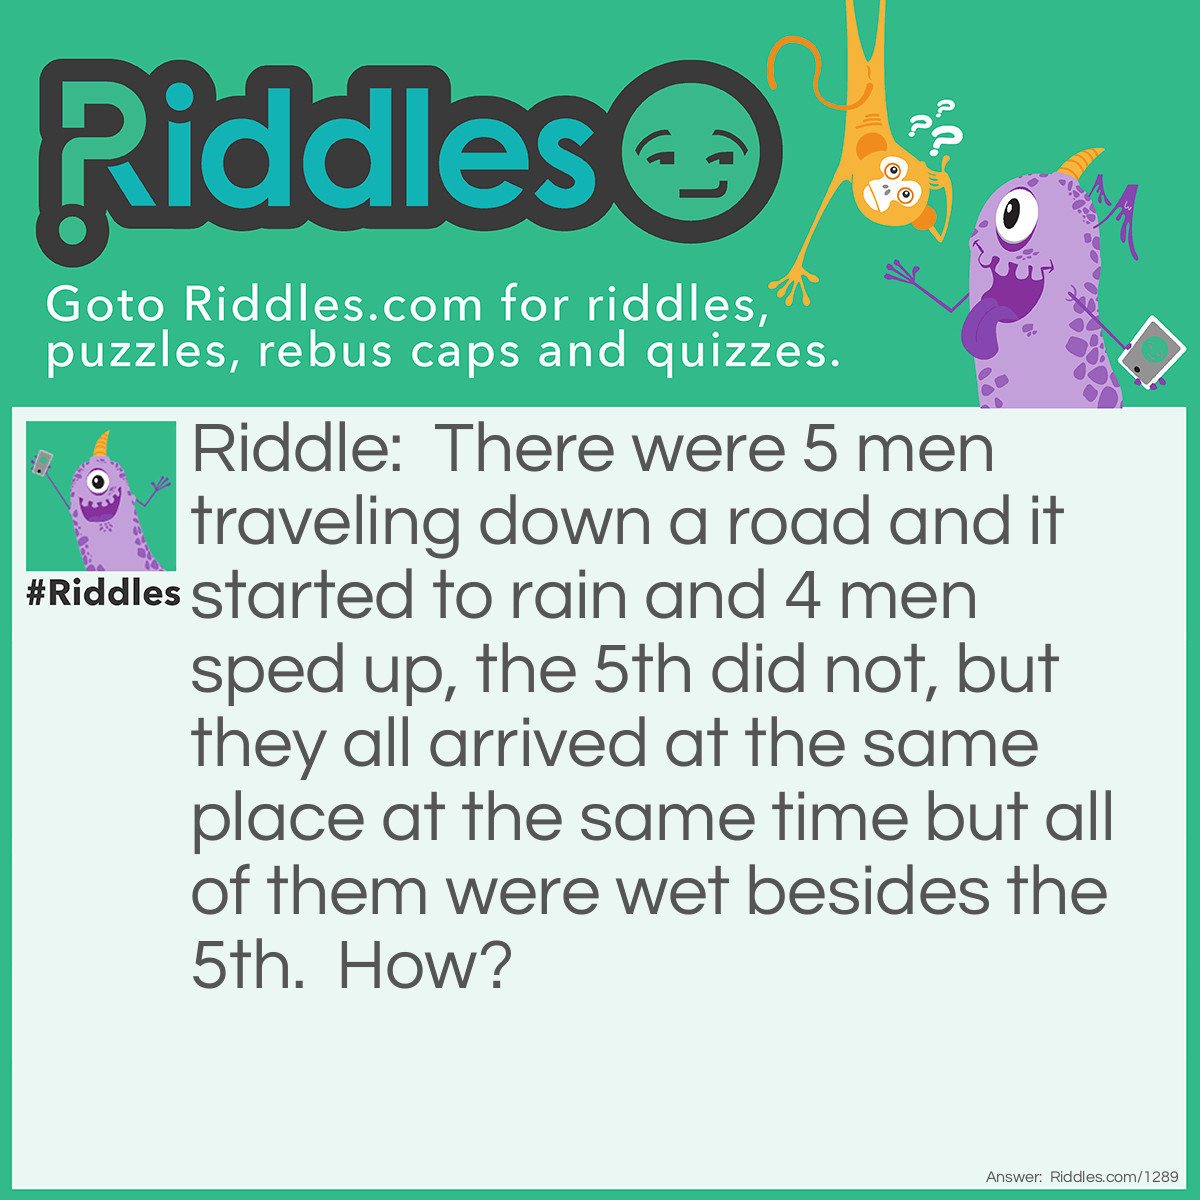 Riddle: There were 5 men traveling down a road and it started to rain and 4 men sped up, the 5th did not, but they all arrived at the same place at the same time but all of them were wet besides the 5th.  How? Answer: He was dead and in a coffin.